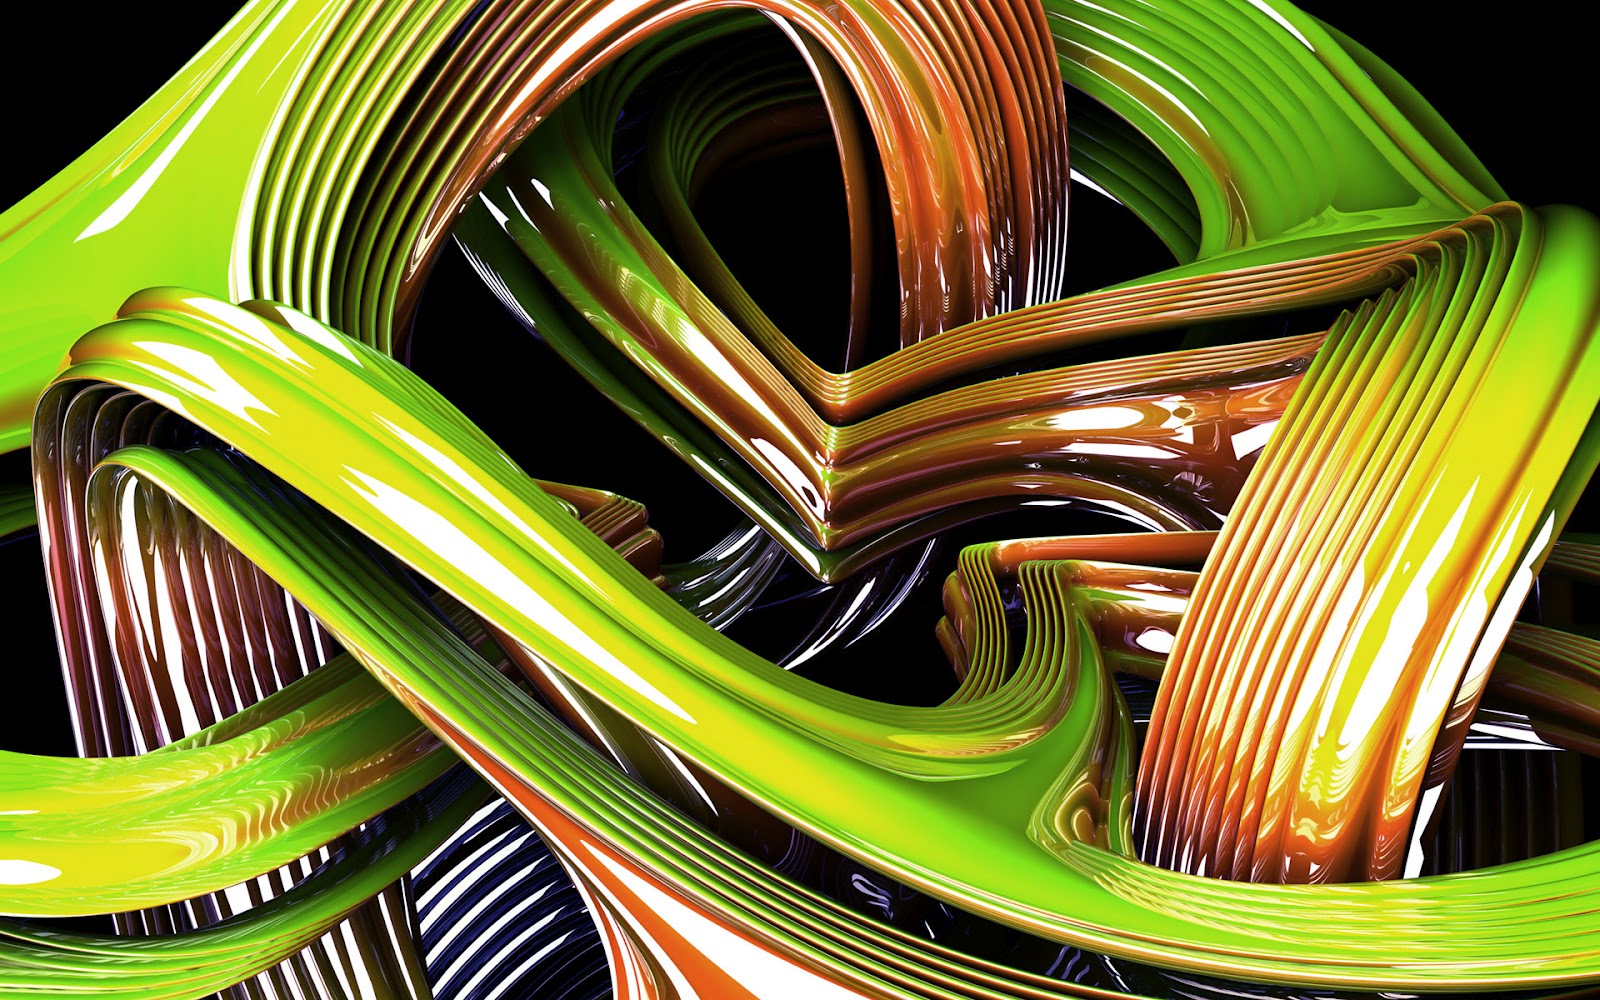 Great Abstract 3D Wallpaper | Abstract Graphic Wallpaper